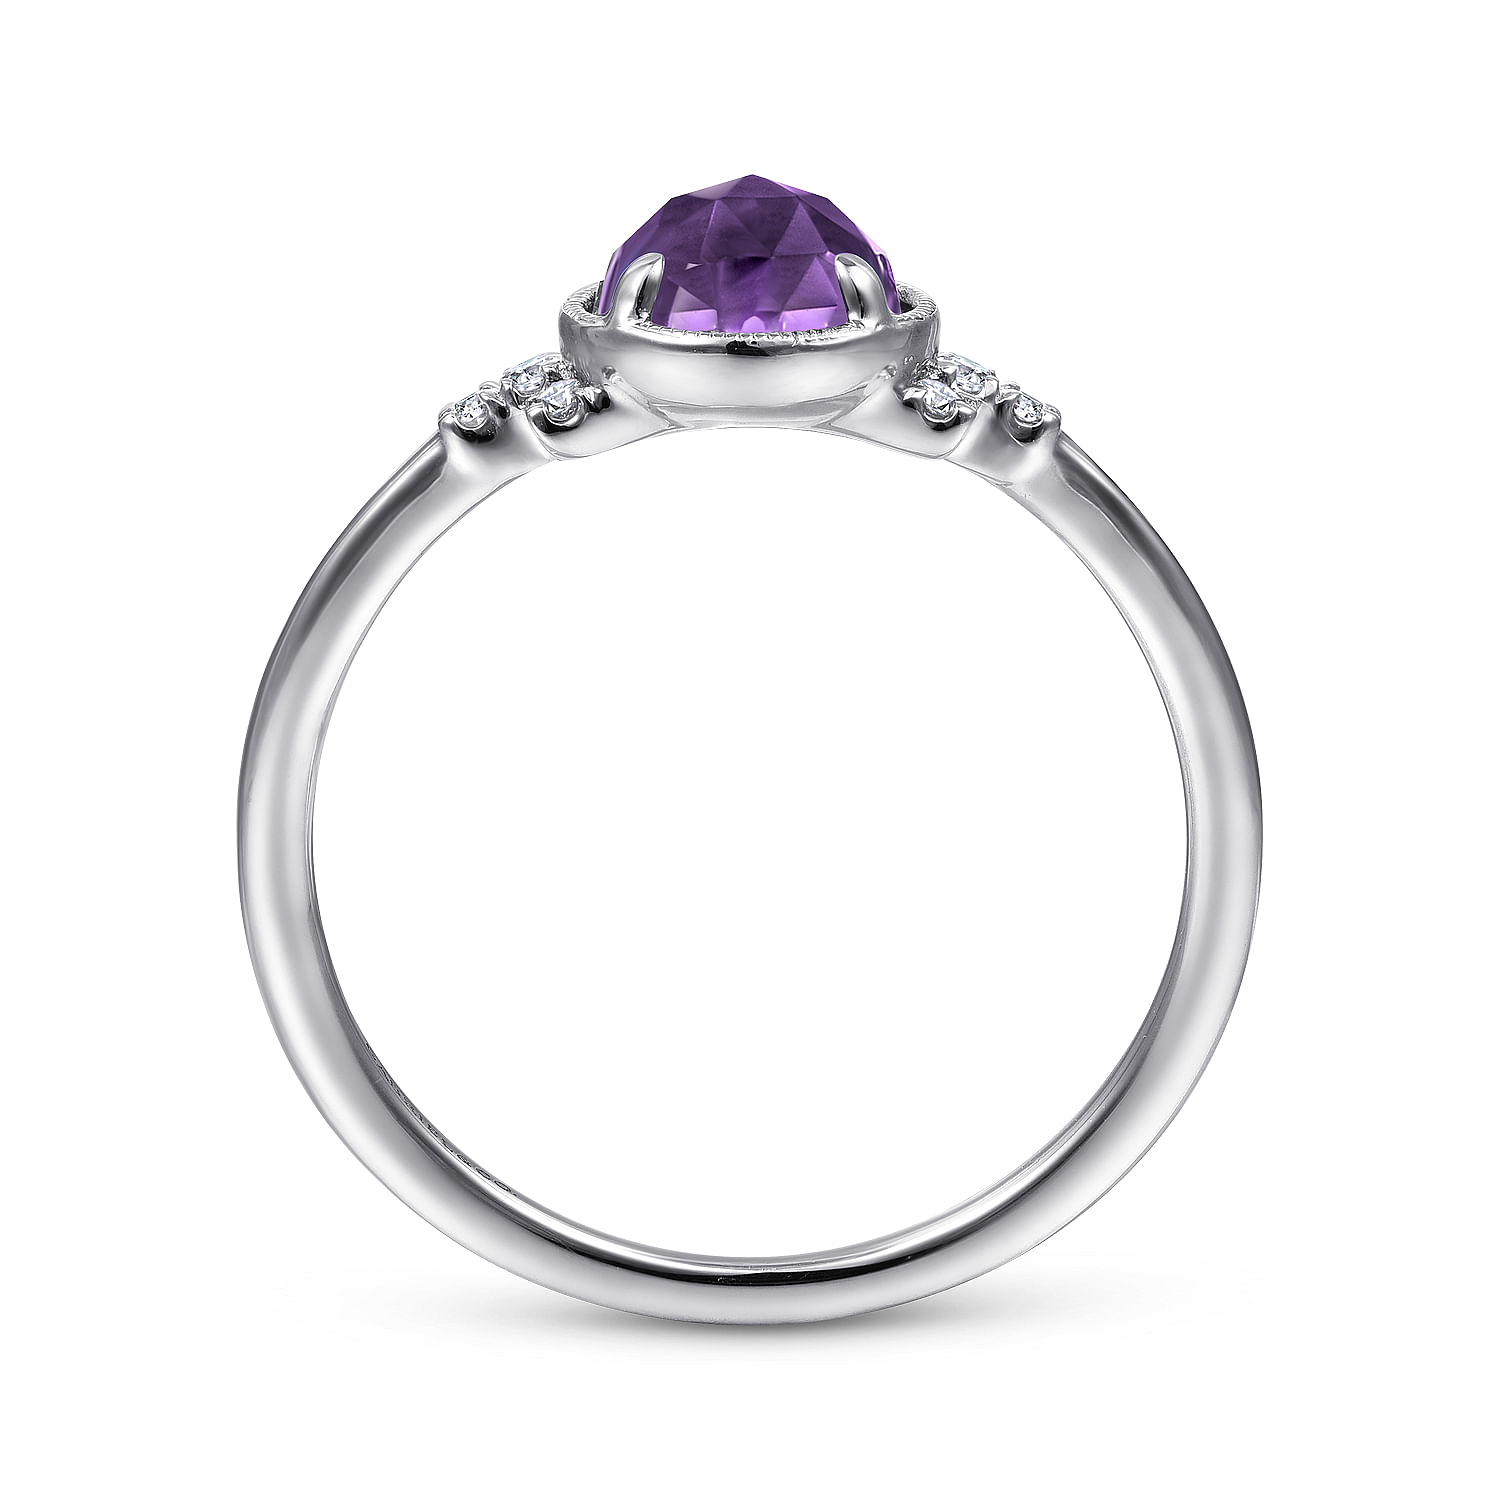 14K White Gold Round Bezel Set Amethyst Ring with Diamond Side Accents